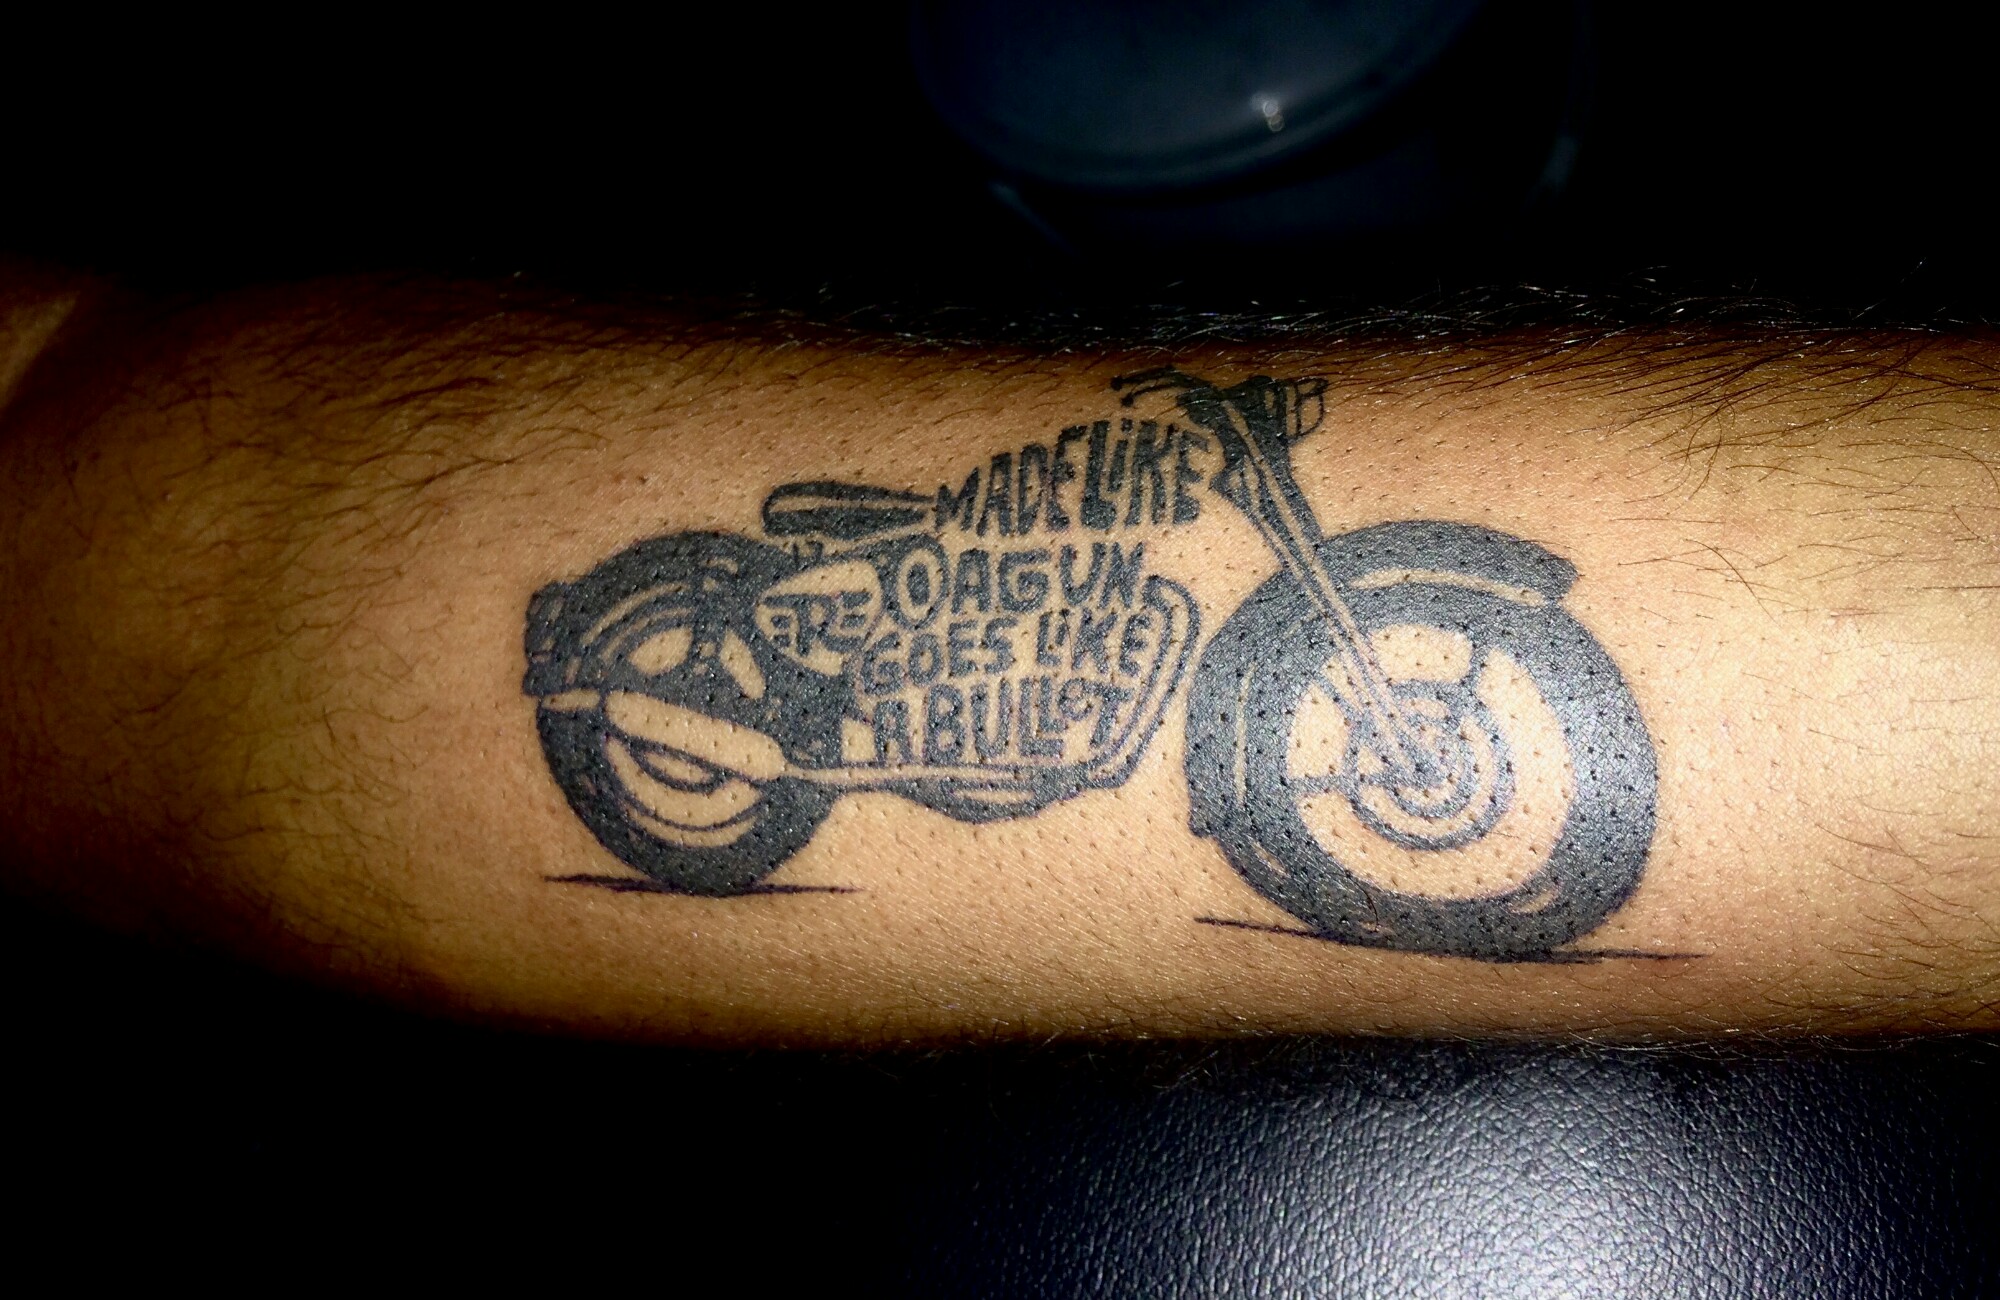 Share 86 about royal enfield bullet tattoo super cool  indaotaonec